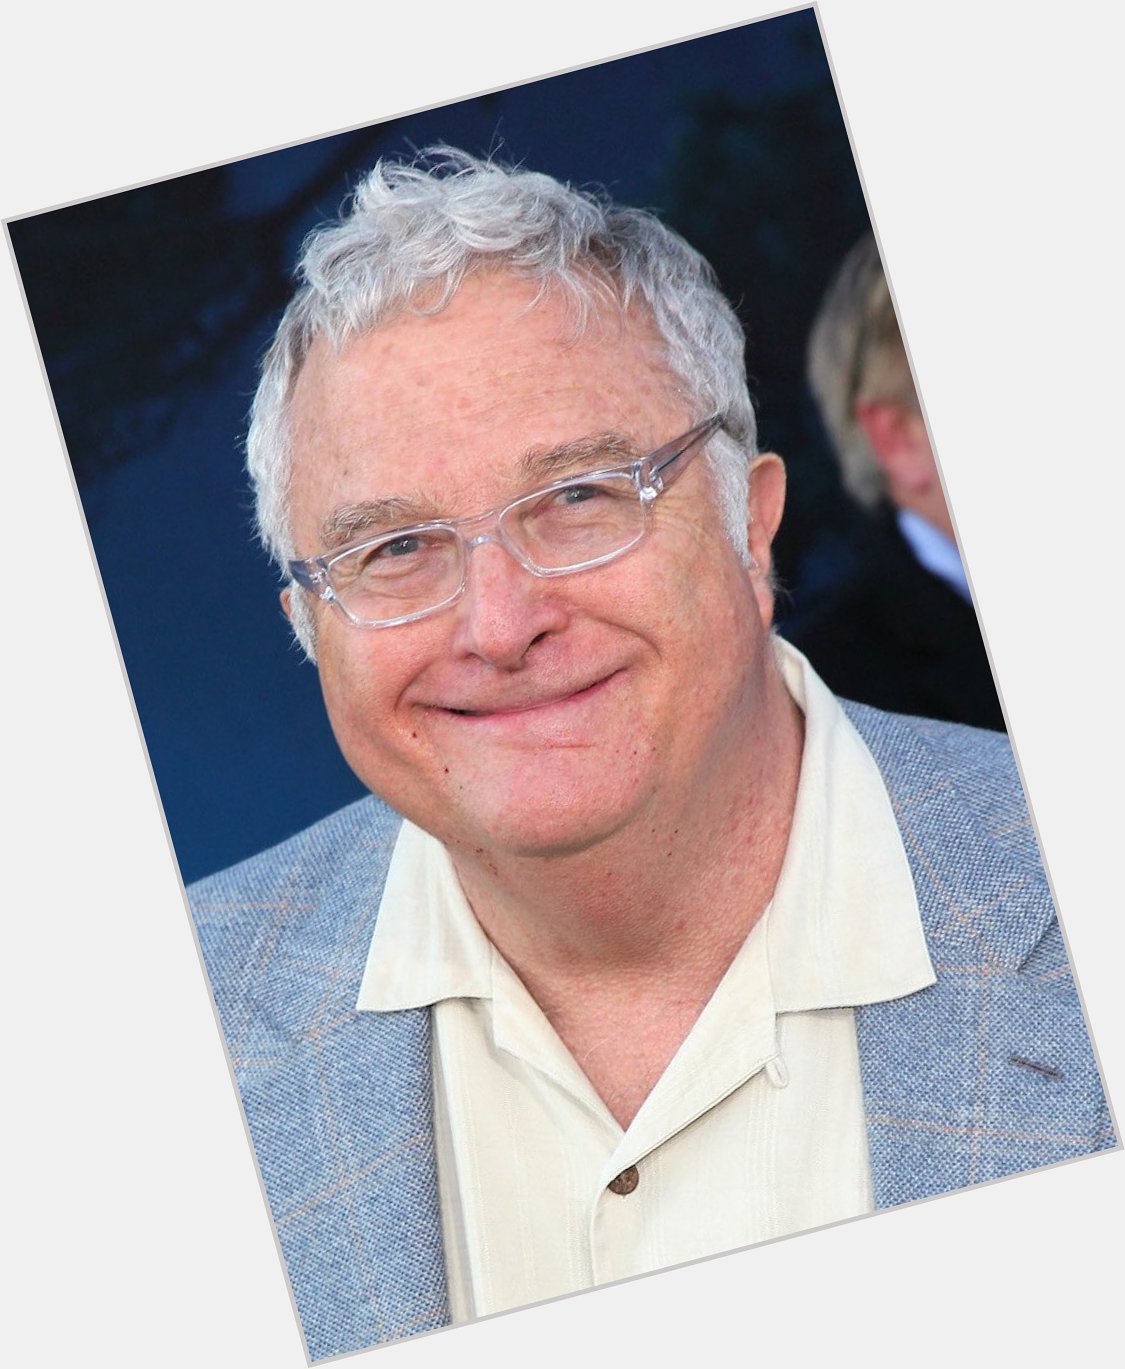 Happy Birthday to singer, songwriter, arranger, musician and pianist Randy Newman born on November 28, 1943 